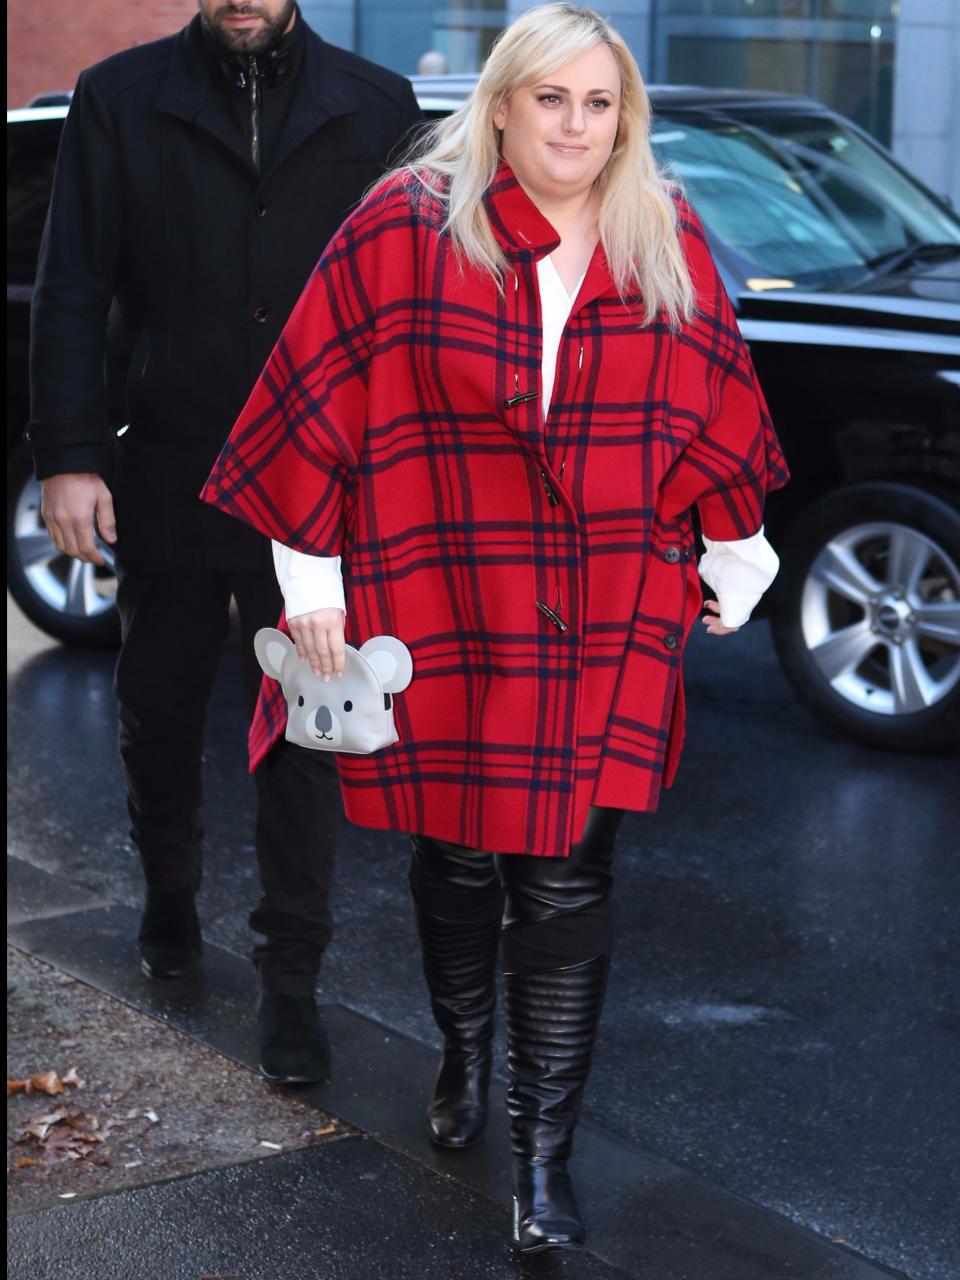 Rebel Wilson's court couture